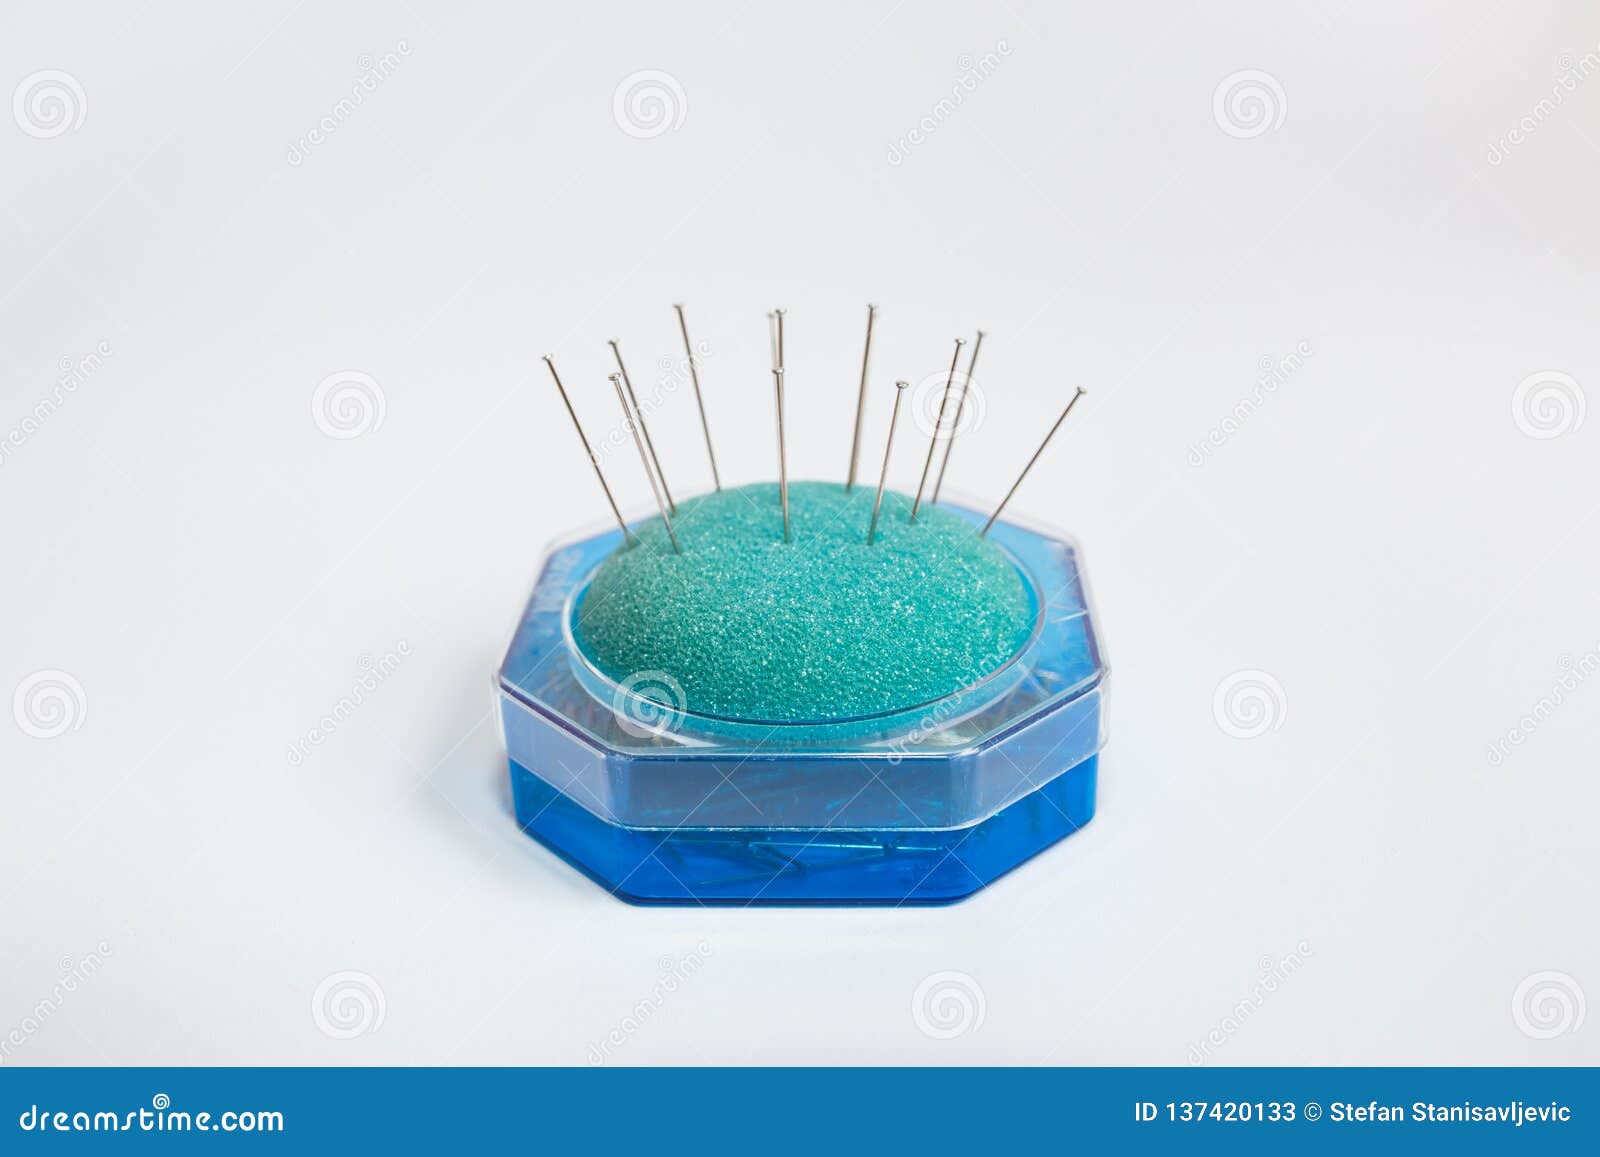 Pin Cushion In Box With Sewing Pins Stock Image Image Of Needle Copy